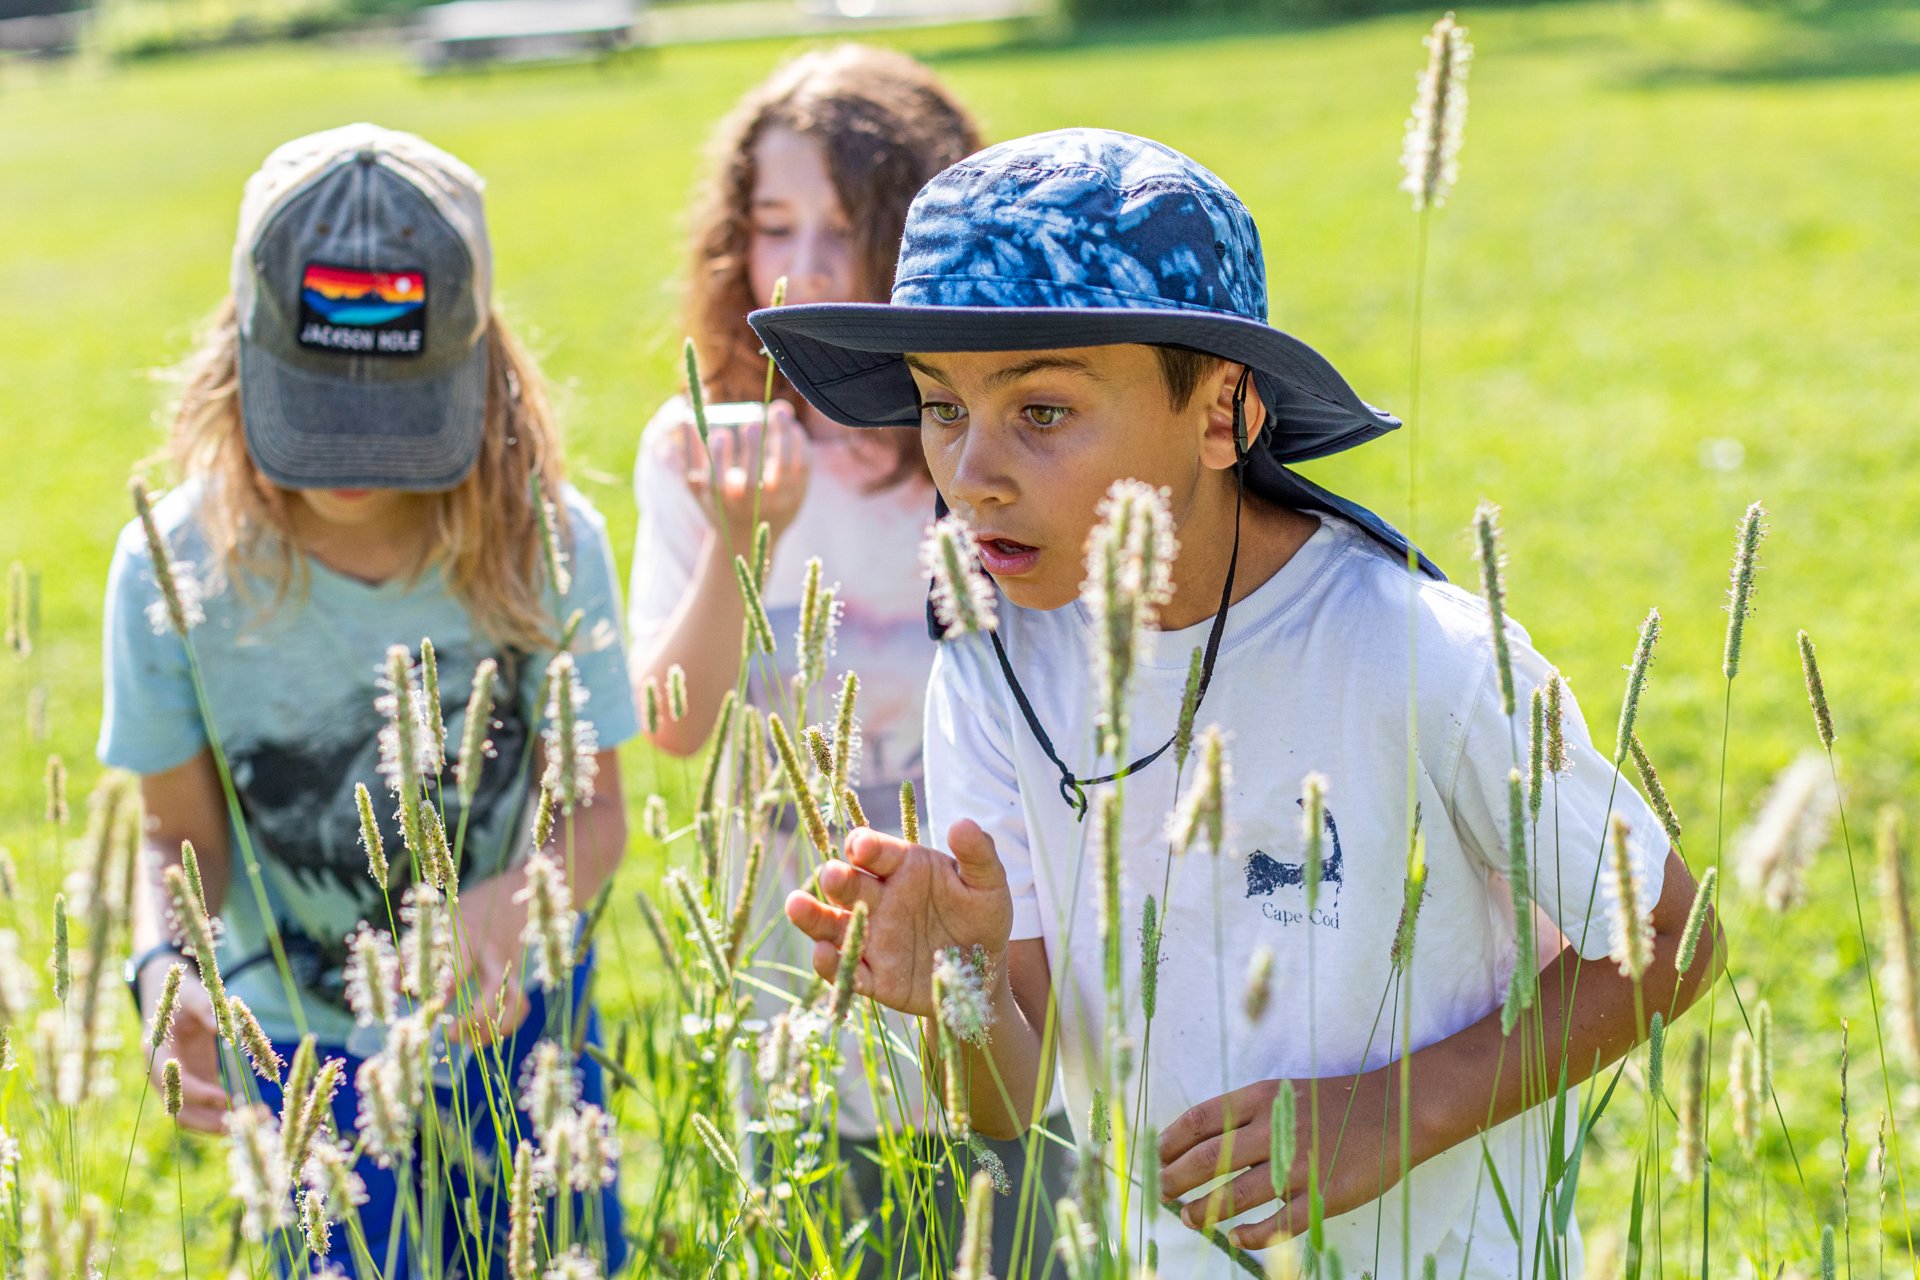 Three campers at Arcadia Nature Camp peer closely at tall grass at the edge of a meadow, looking for insects